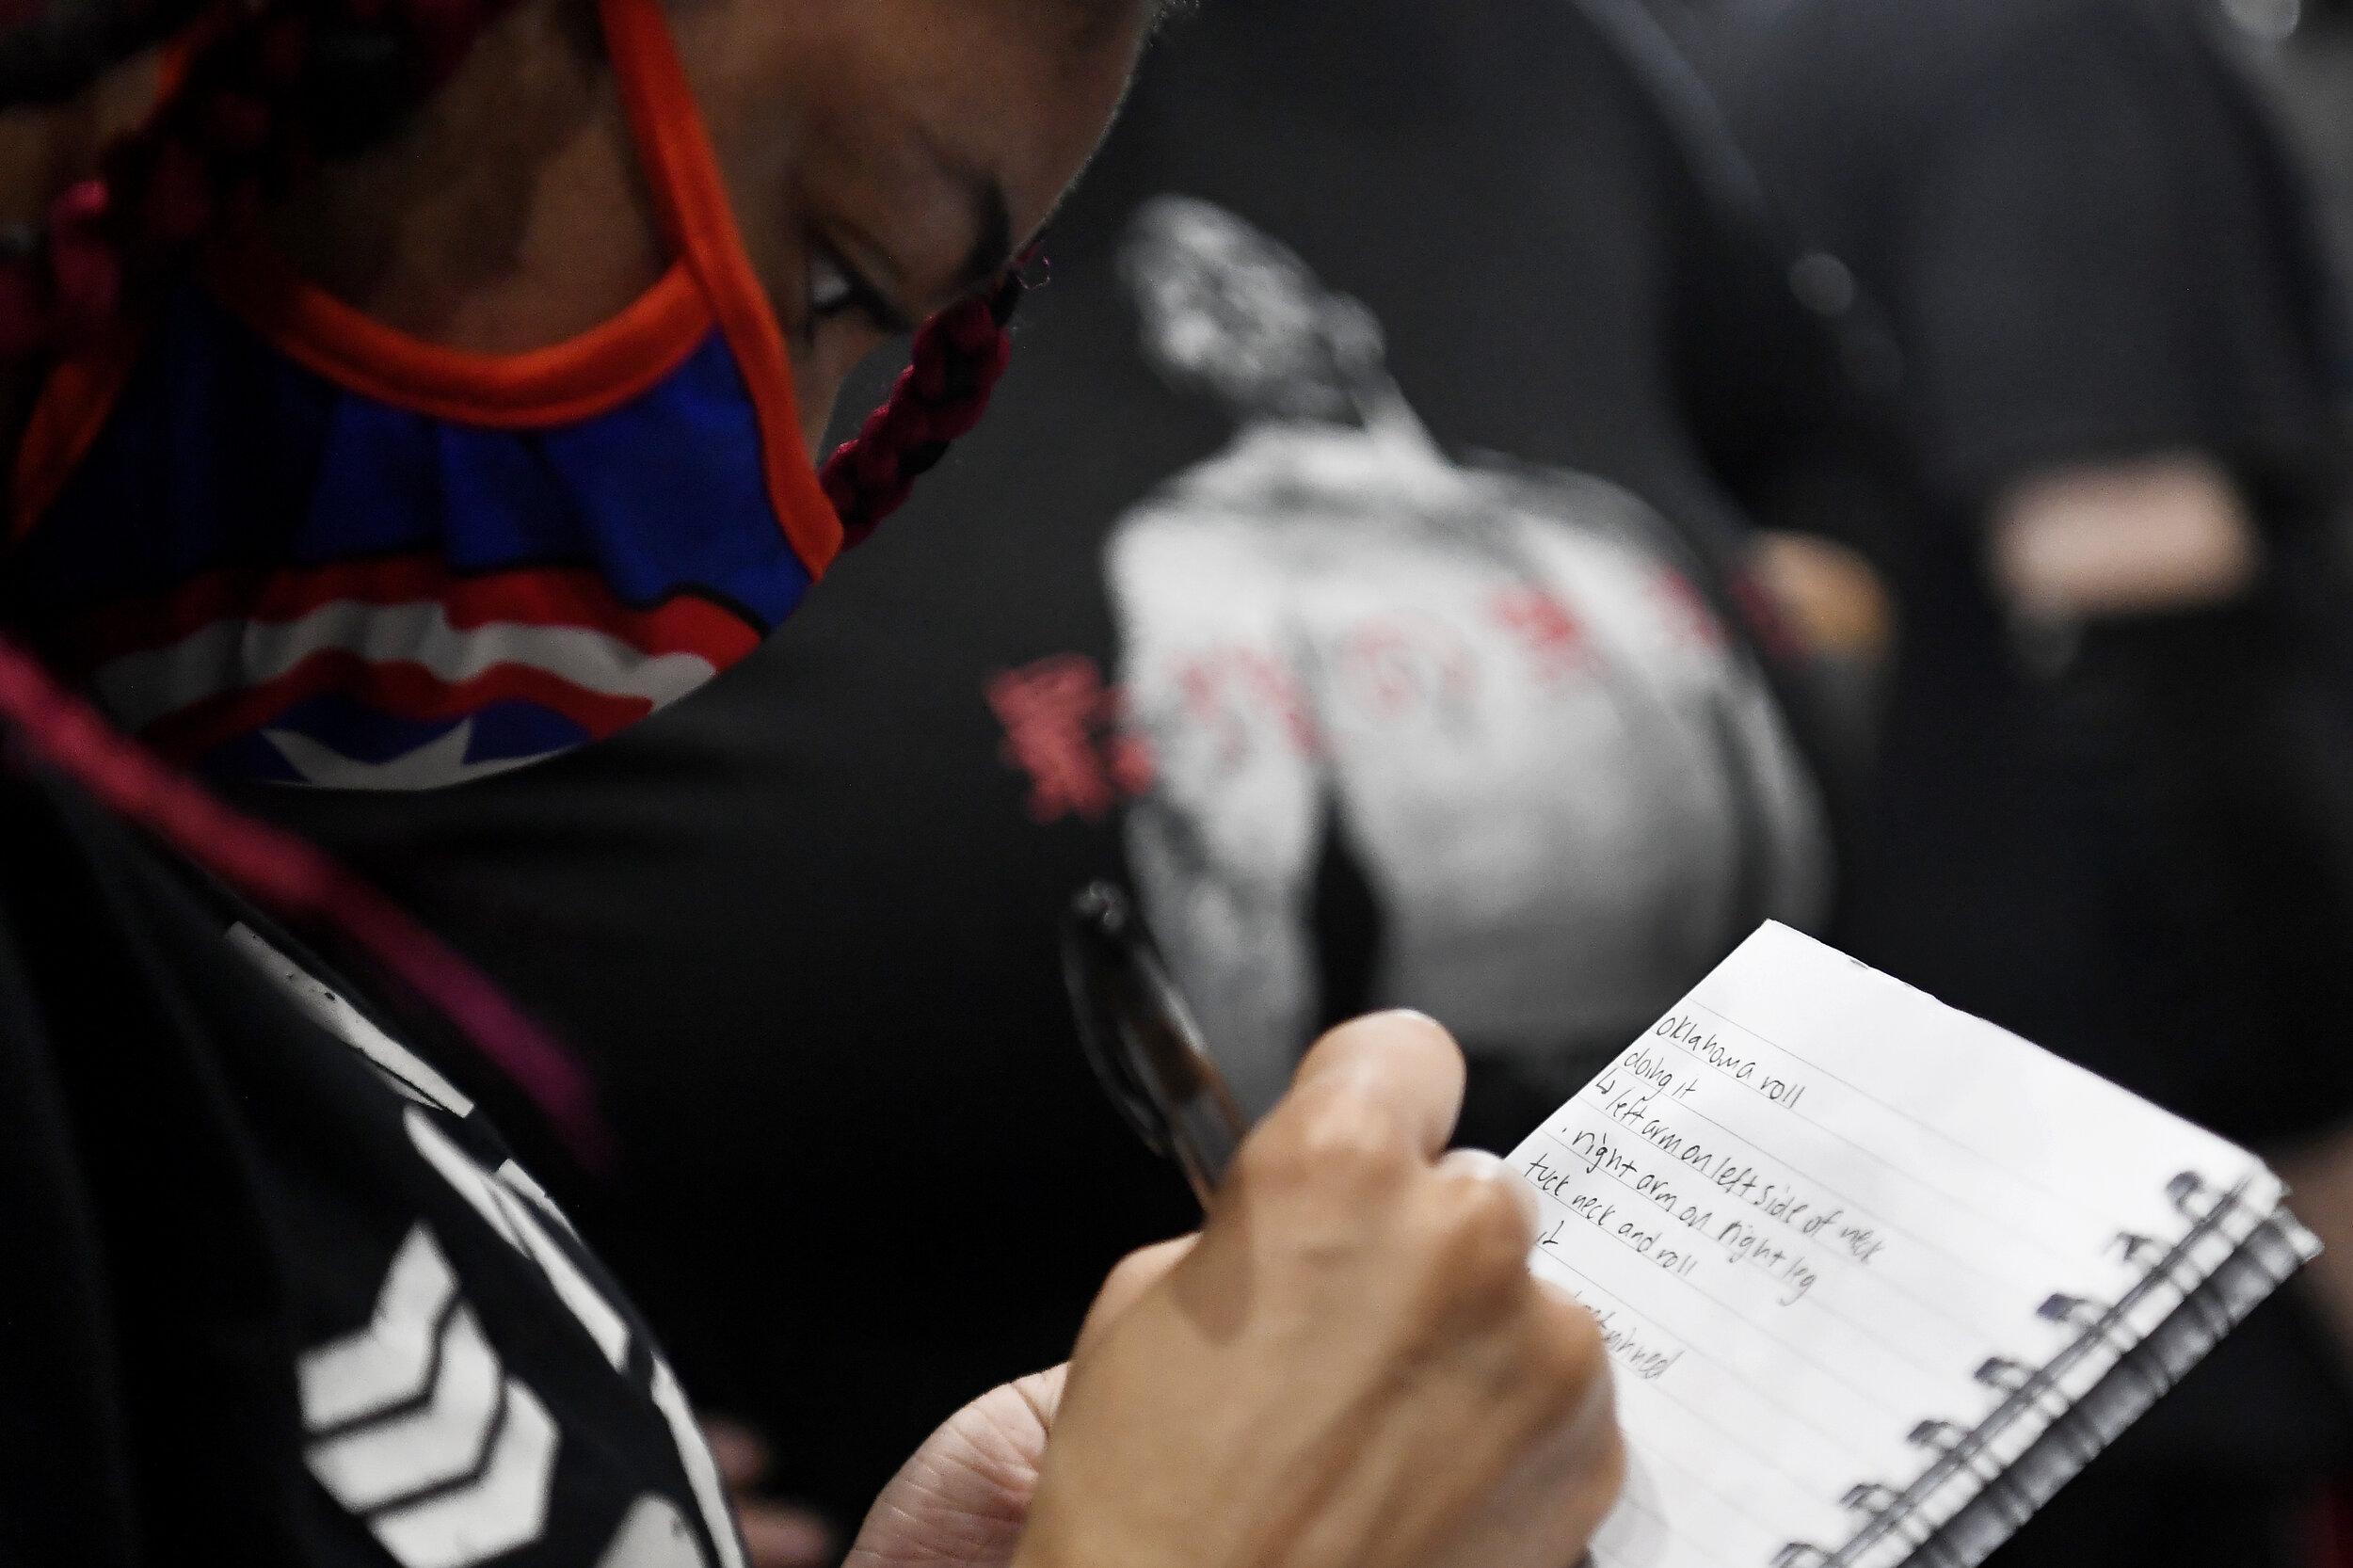  Wrestling student Indigo Detry takes notes during a practice session at Technique 2 Training Wrestling Academy on October 28, 2018, in Williamsburg, Brooklyn, New York. 